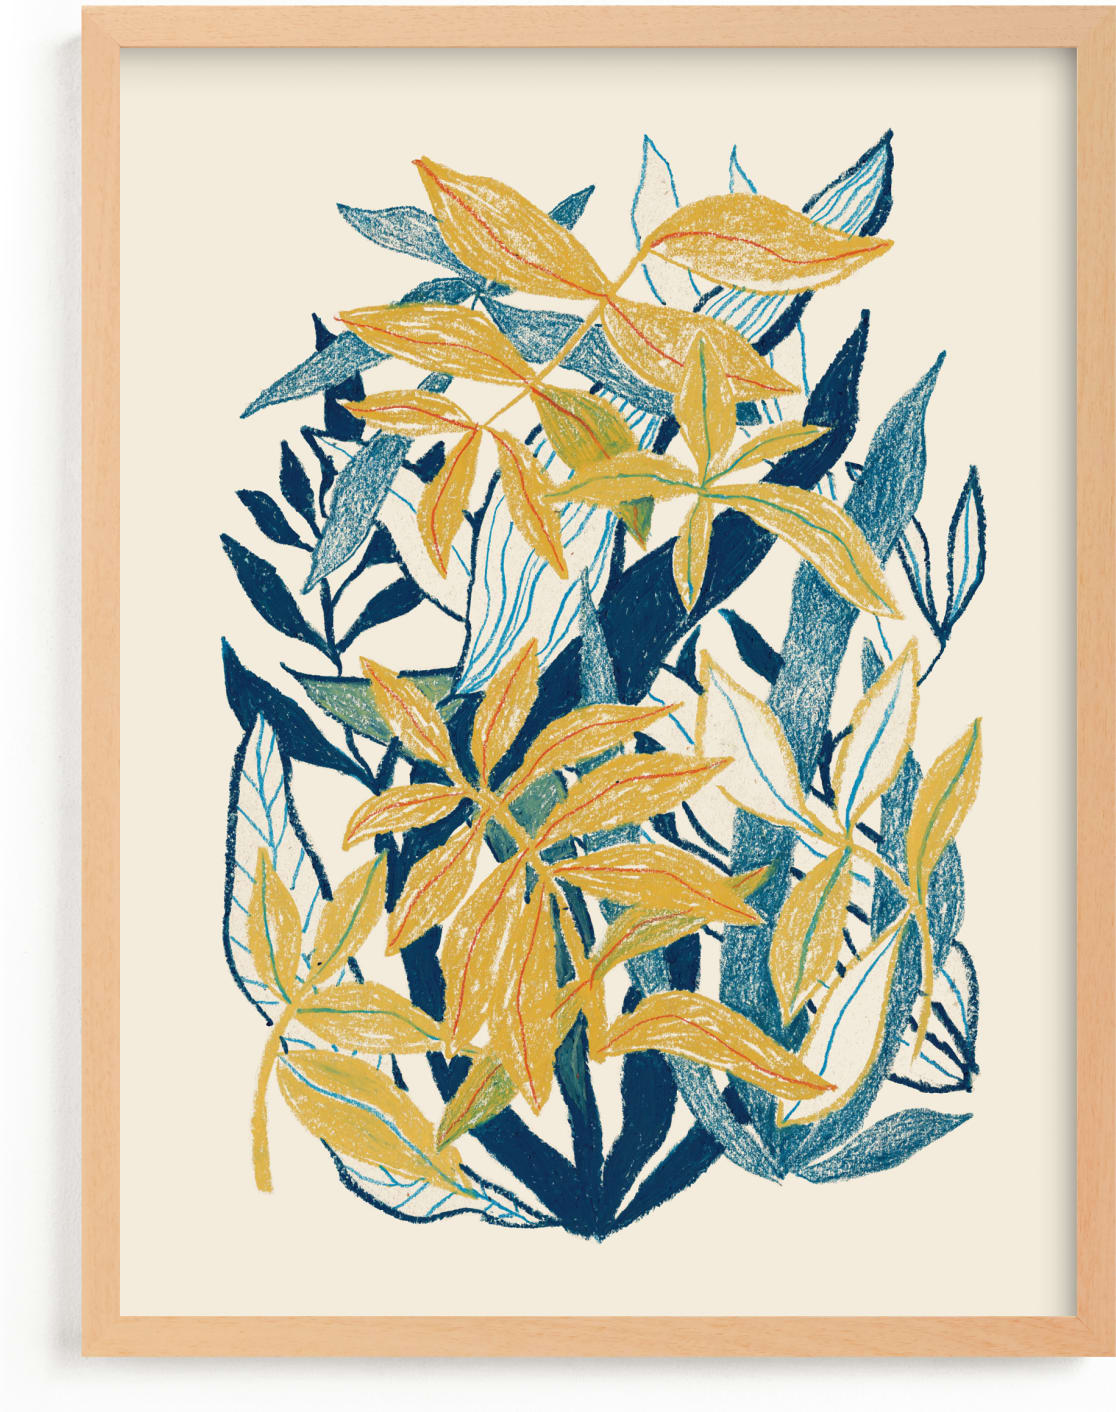 This is a blue, yellow, gold art by Catilustre called My Hiding Place.